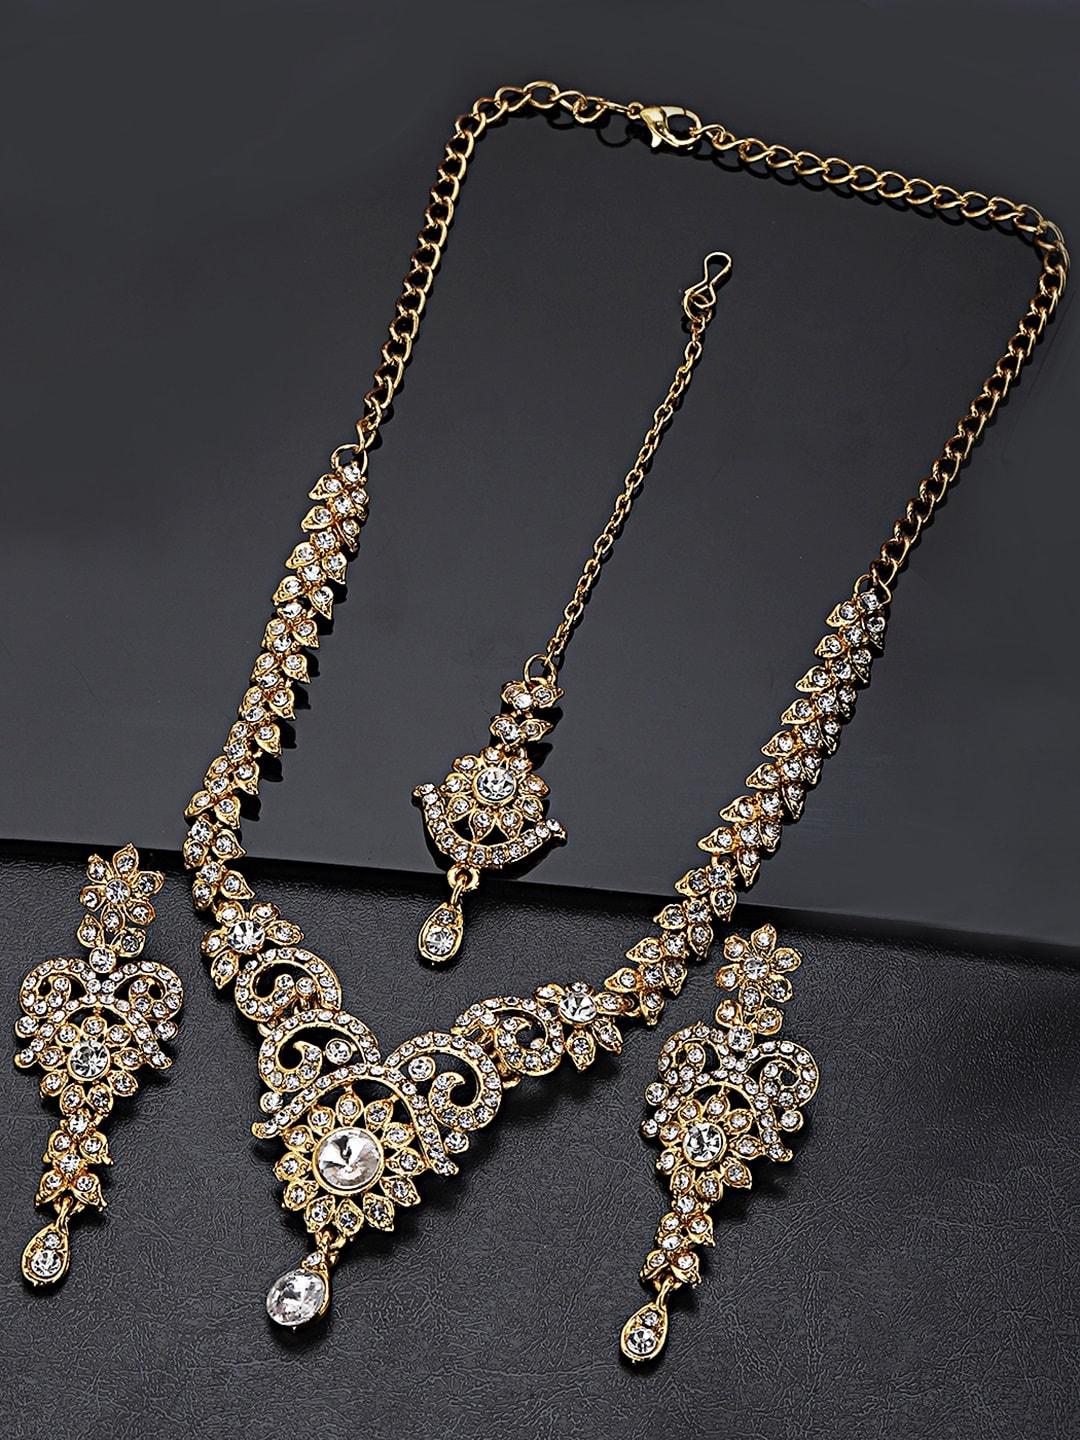 carlton-london-gold-plated-cz-studded-handcrafted-jewellery-set